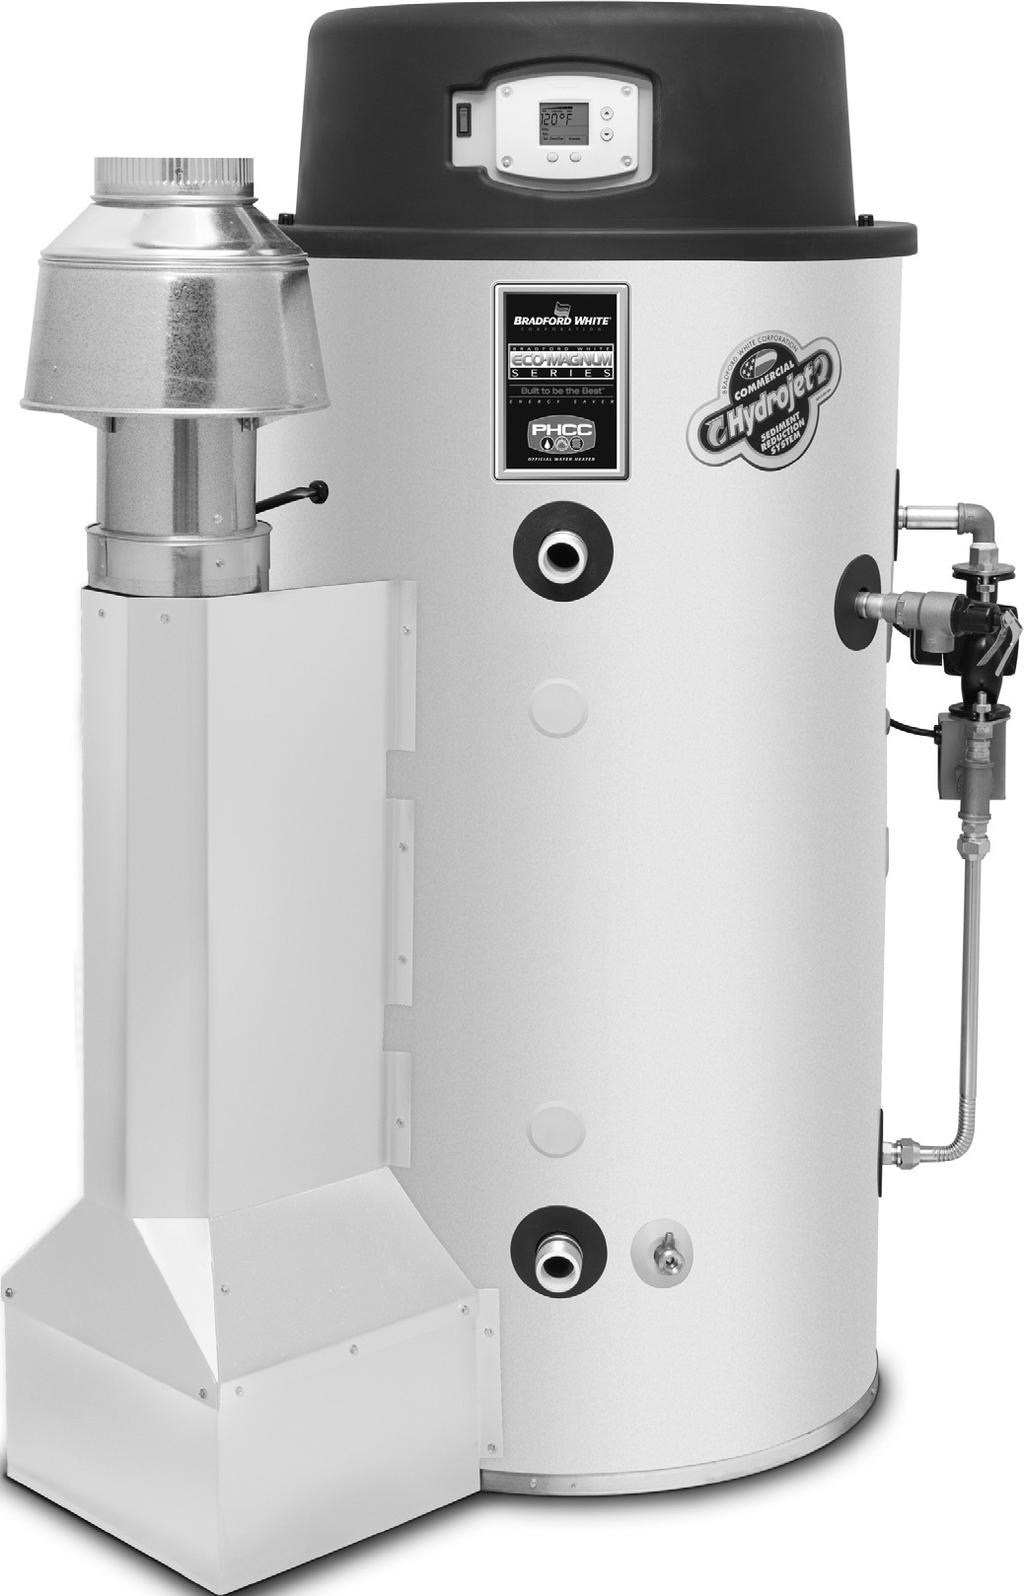 COMMERCIAL GAS REPLACEMENT PARTS LIST ULTRA LOW NOx ATMOSPHERIC VENT WATER HEATER U65L(155,199,270)E*N(A) U100L(199,270,300,399)E*N(A) Includes Hydrojet Total Performance System Effective: